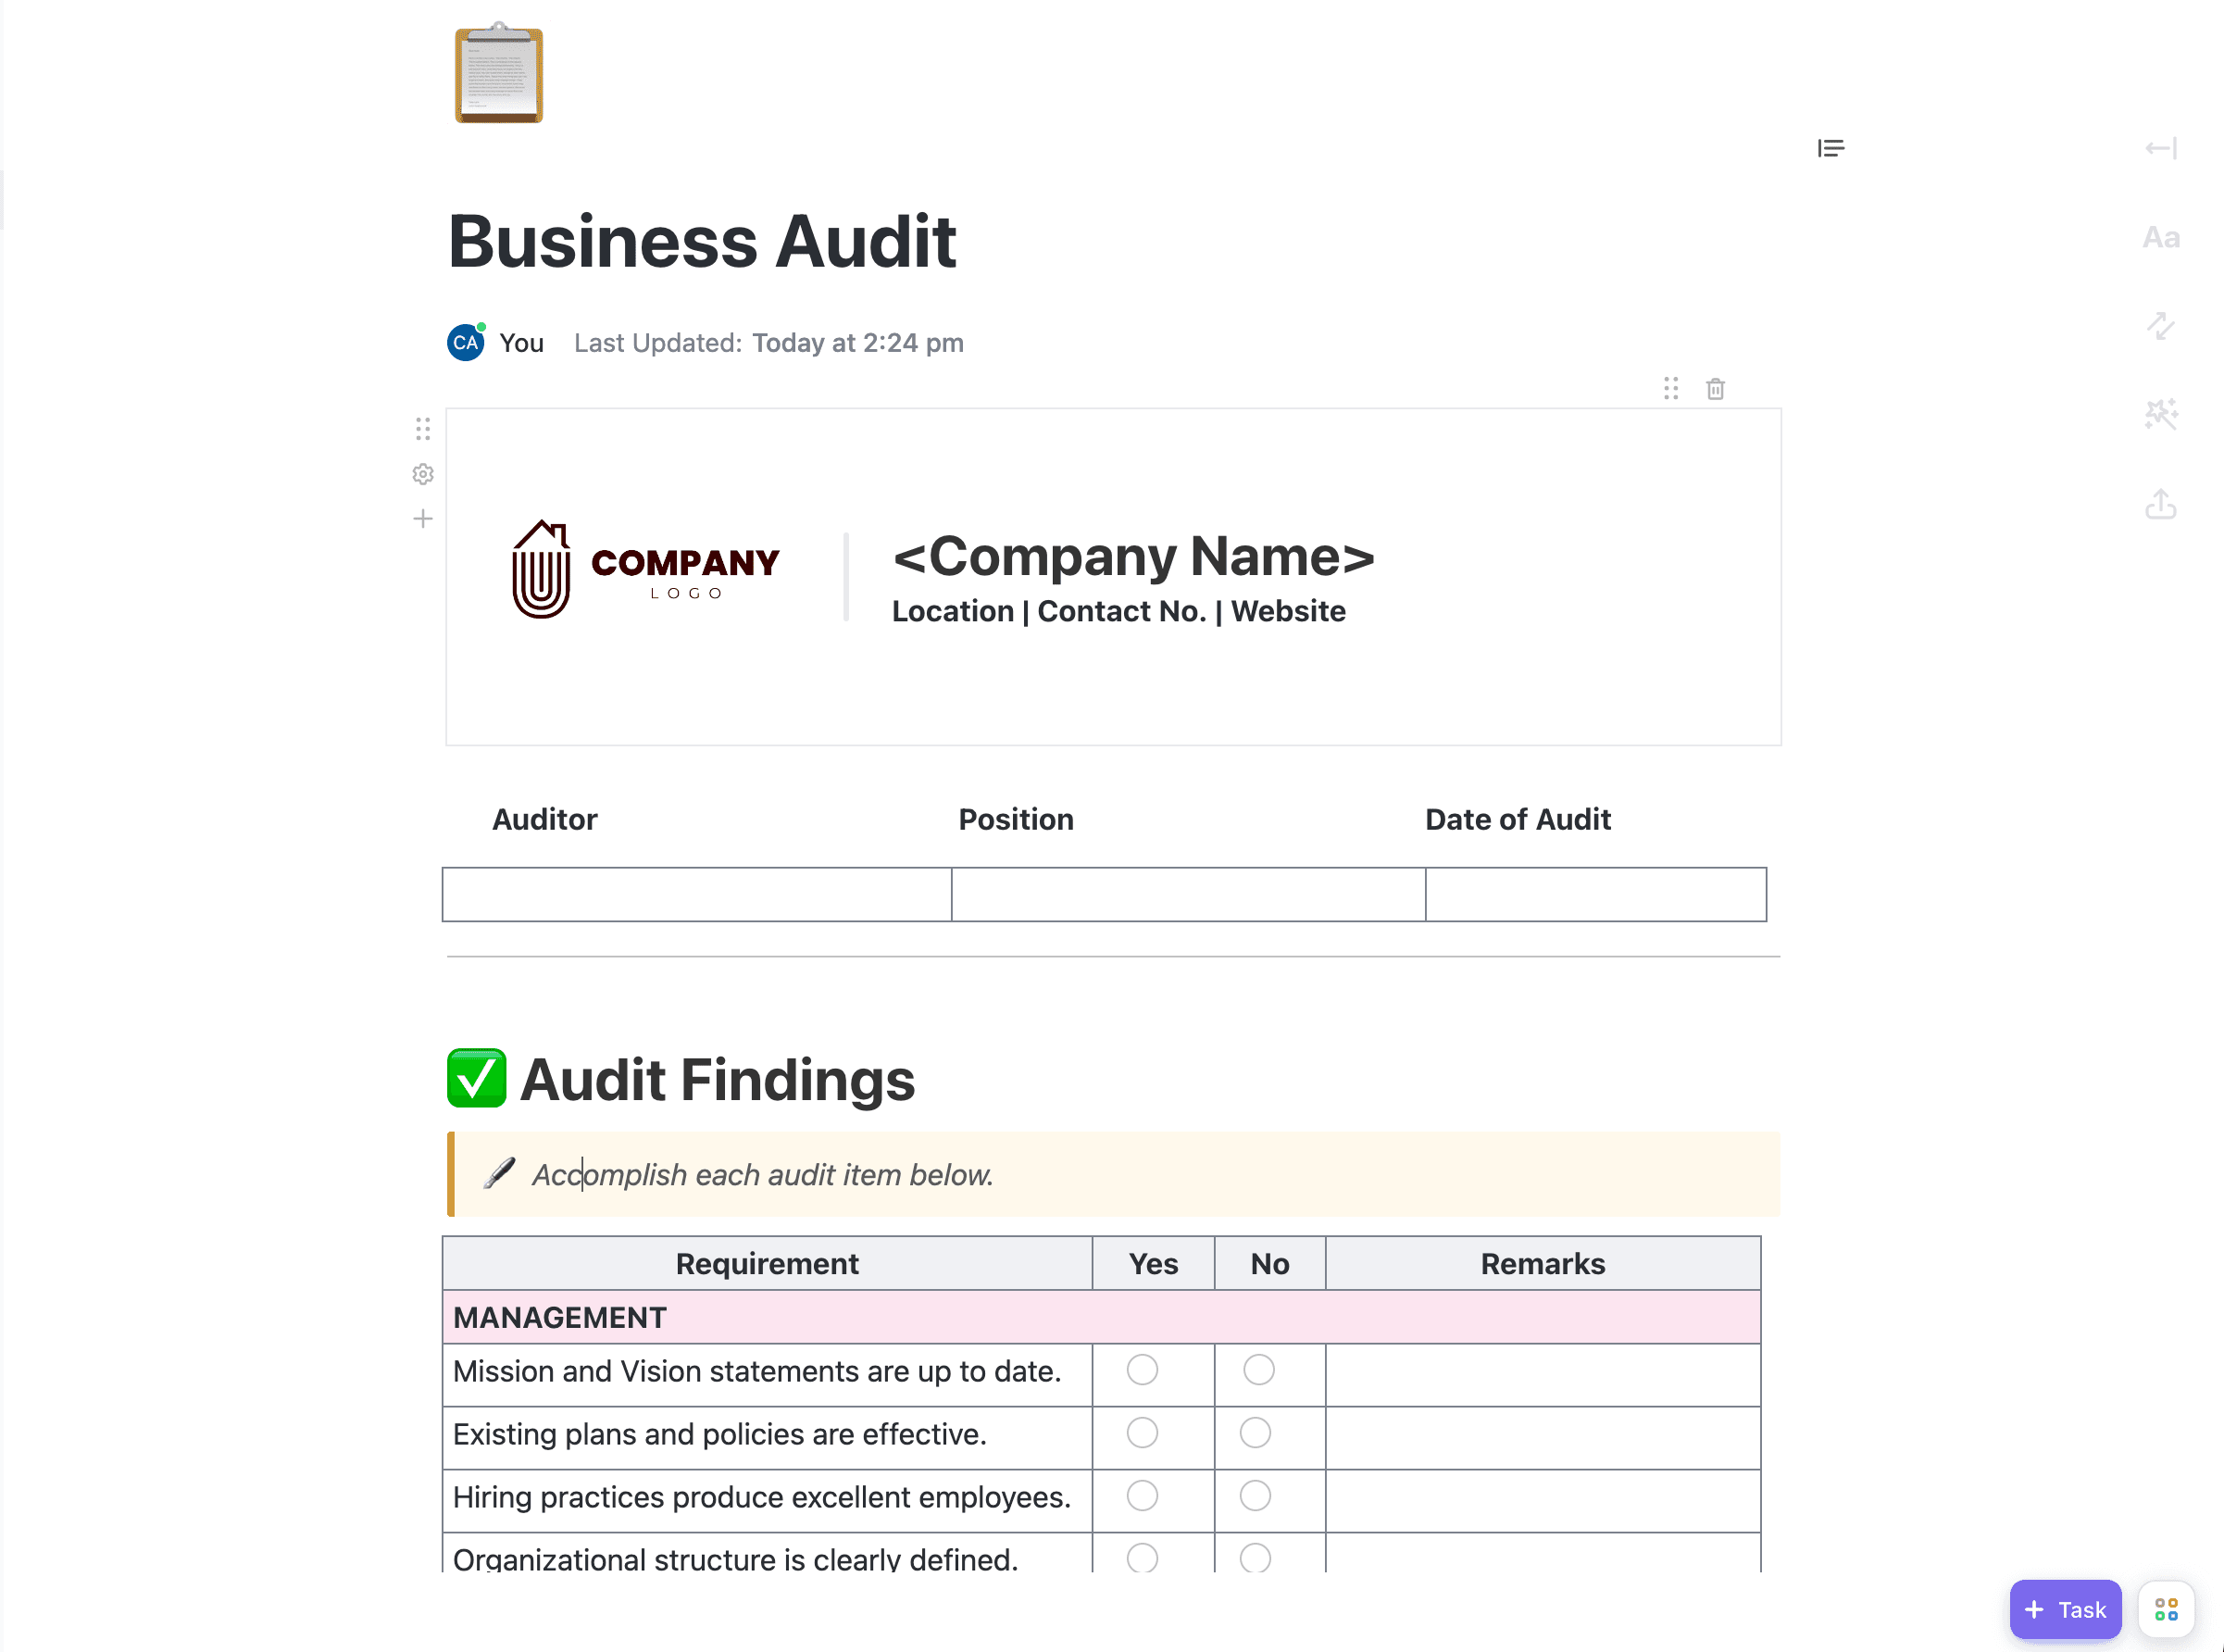 Auditing is an essential process for organizations to ensure compliance with business requirements. With this, ClickUp provides this customizable template which contains the necessary features to conduct the business auditing process with ease.